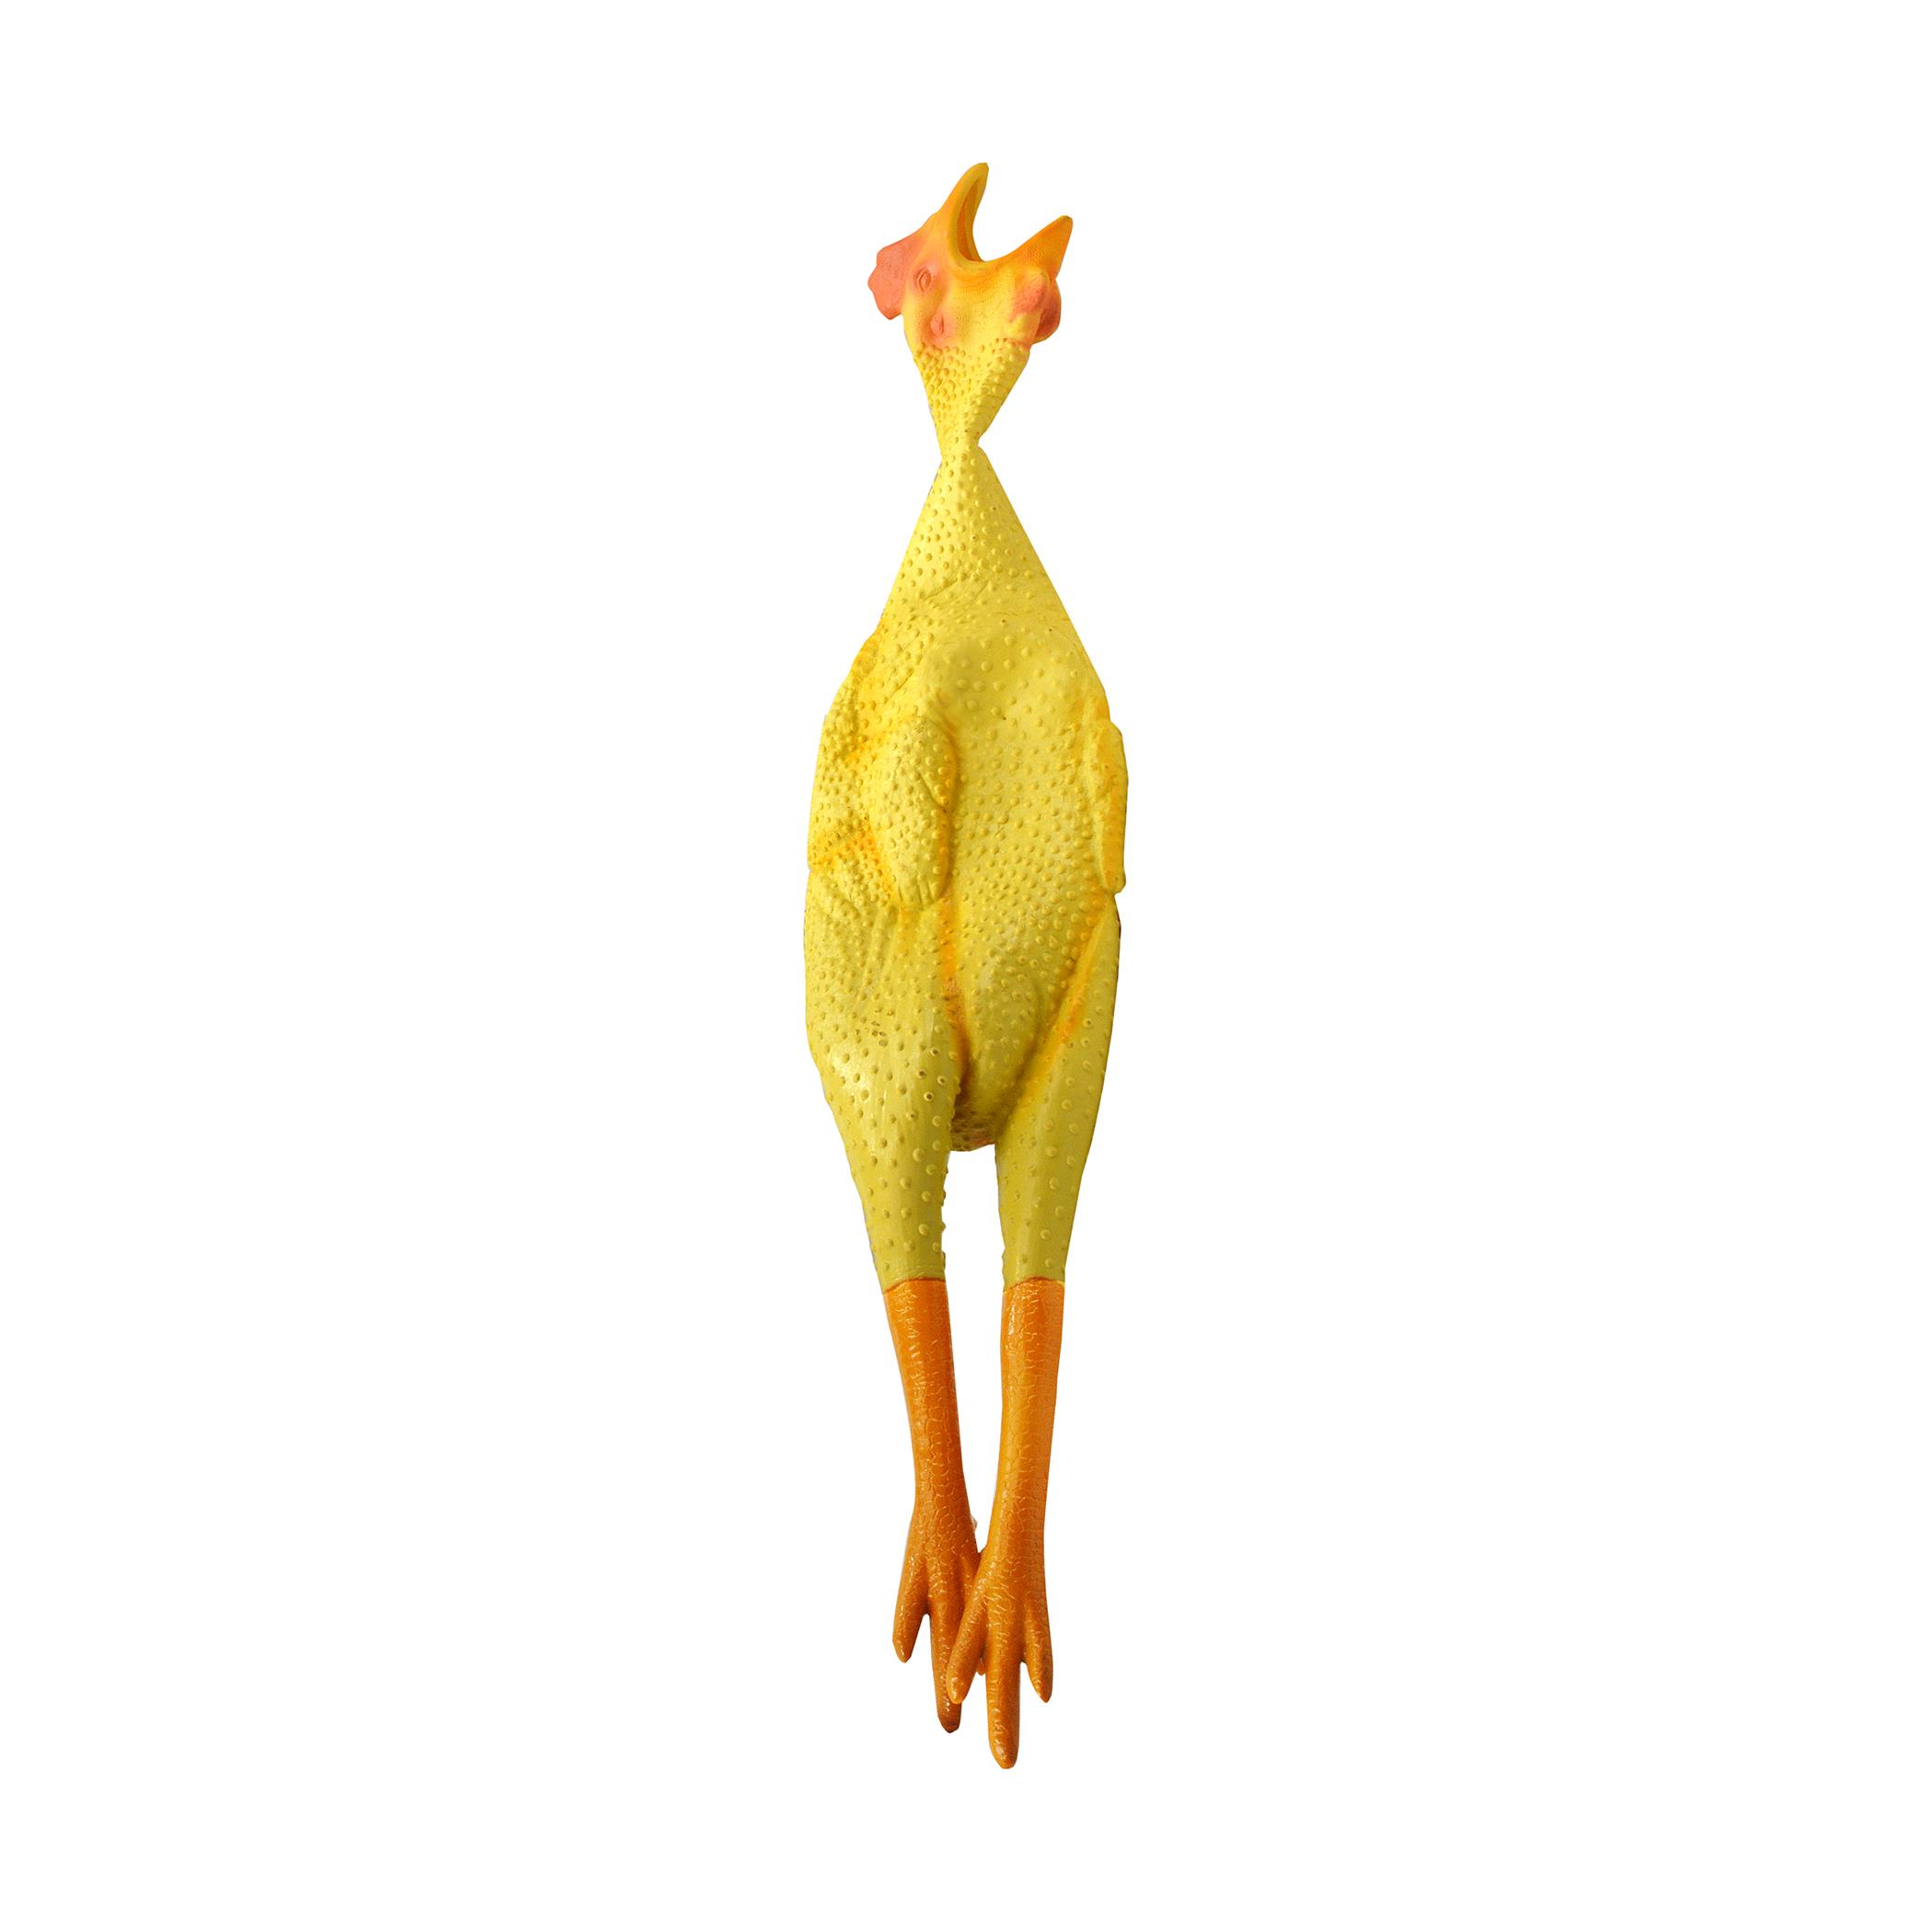 Toy Rubber Chicken | vlr.eng.br